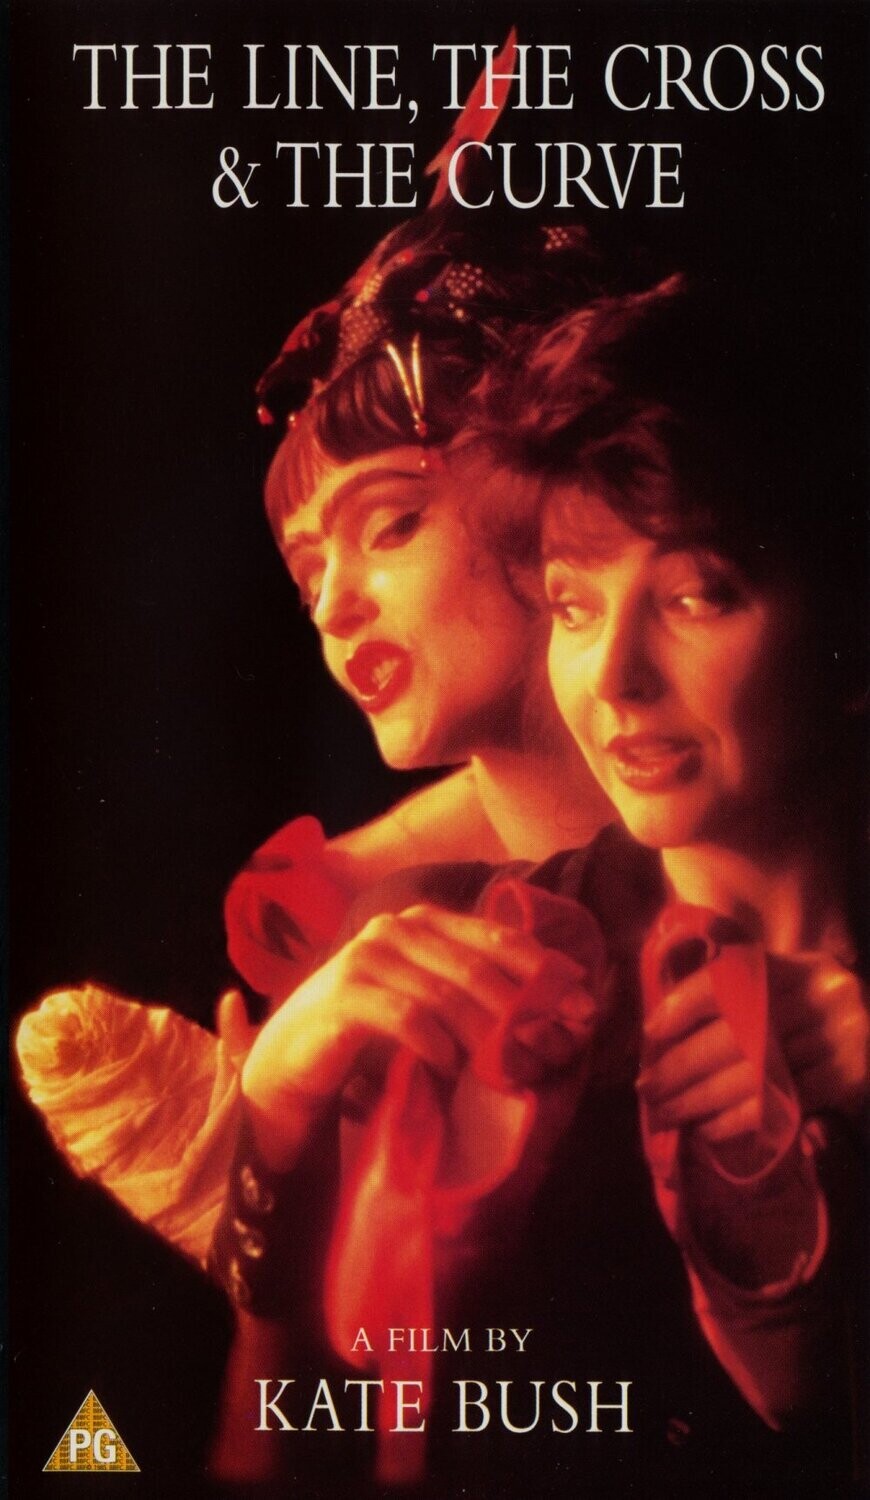 The Line, The Cross and The Curve DVD - Kate Bush - (1993)DIGITAL DOWNLOAD **